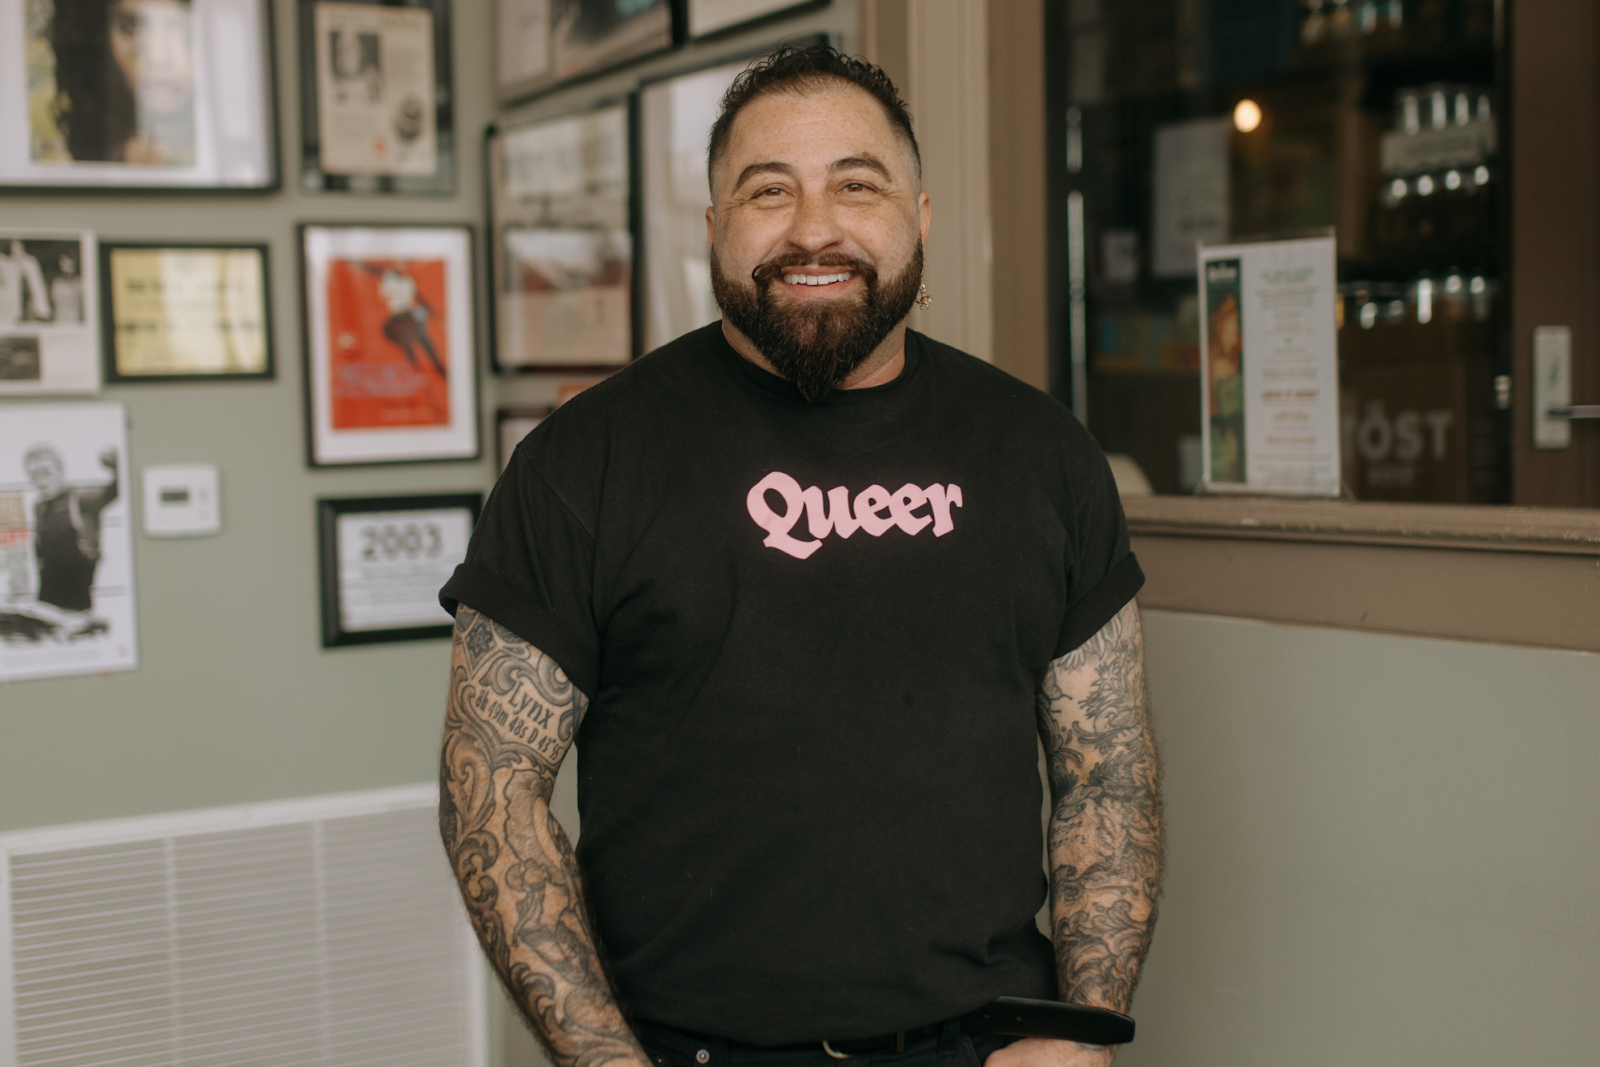 Wearing a prominent "Queer" shirt, Mason Gallo is all smiles inside Queens' Provisions in downtown Flint on May 4, 2024.